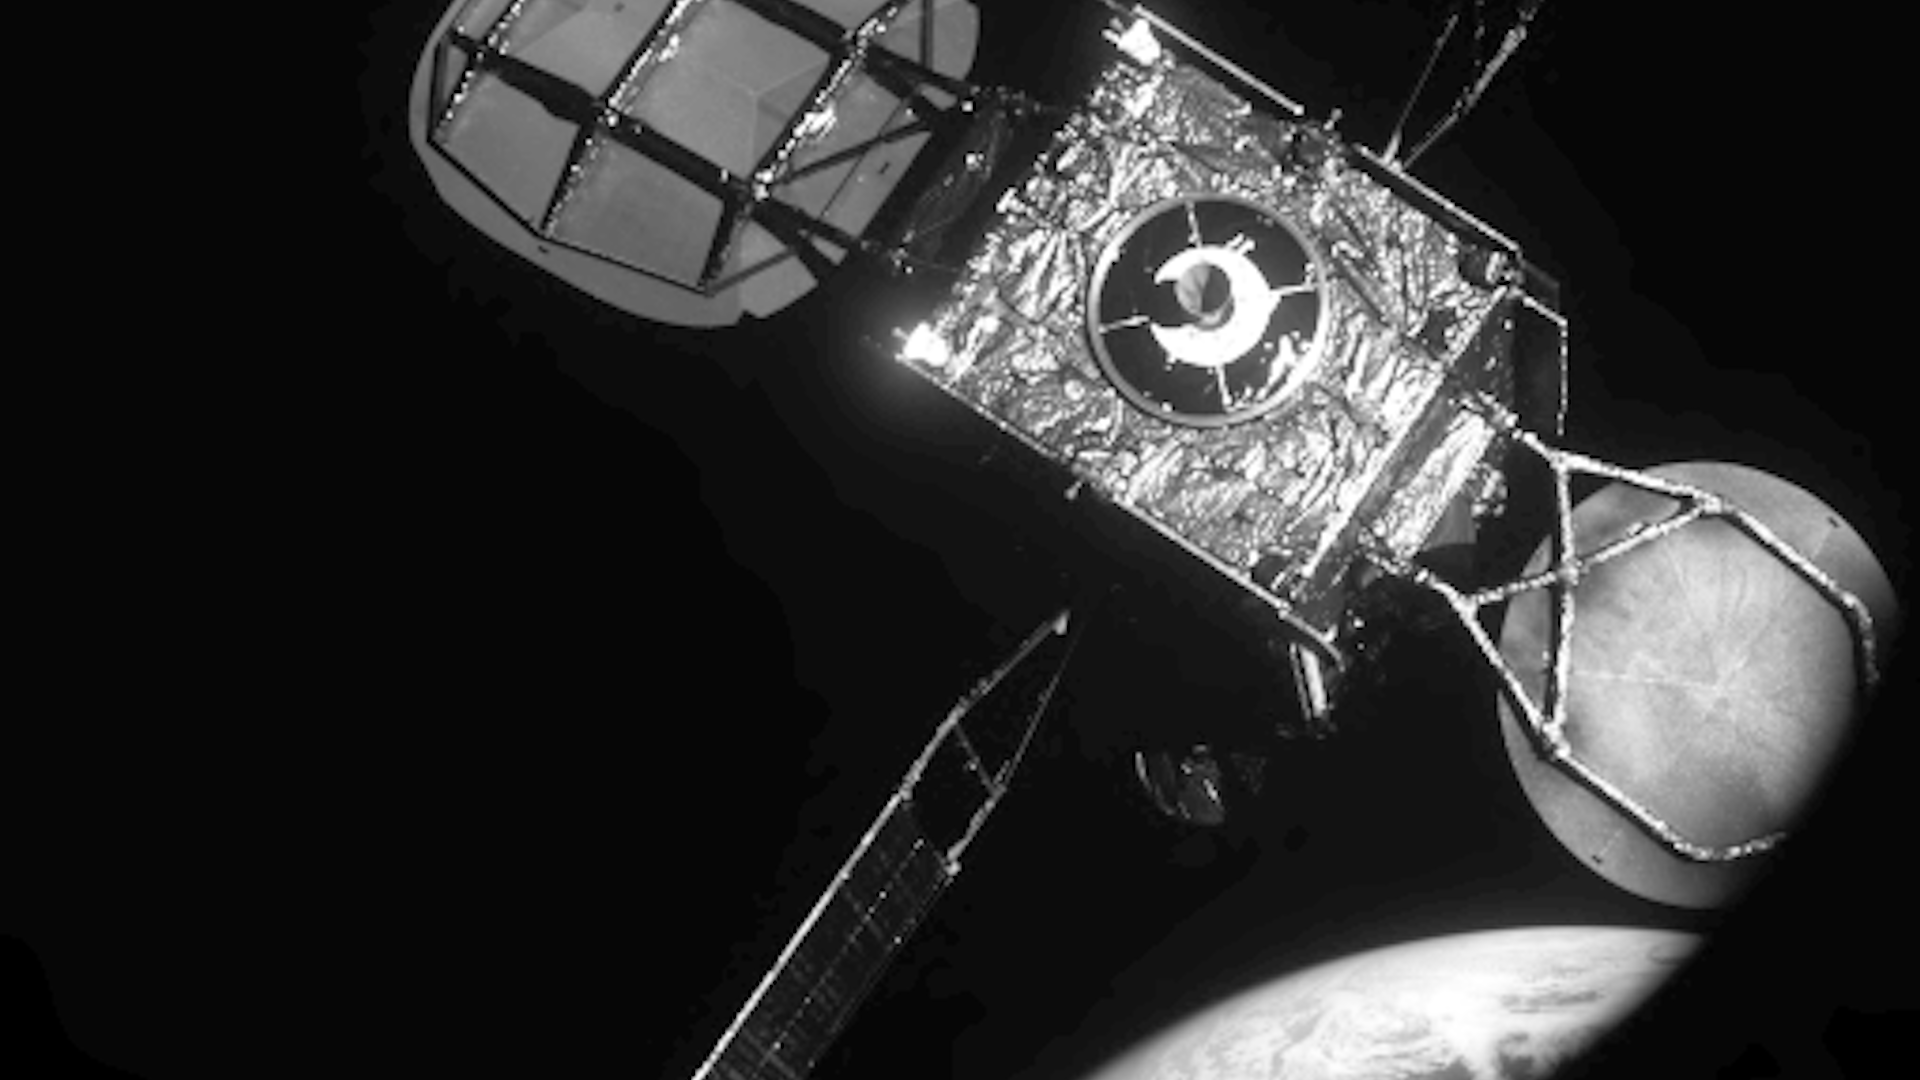 A satellite comes into view above Earth in black and white as seen by another satellite